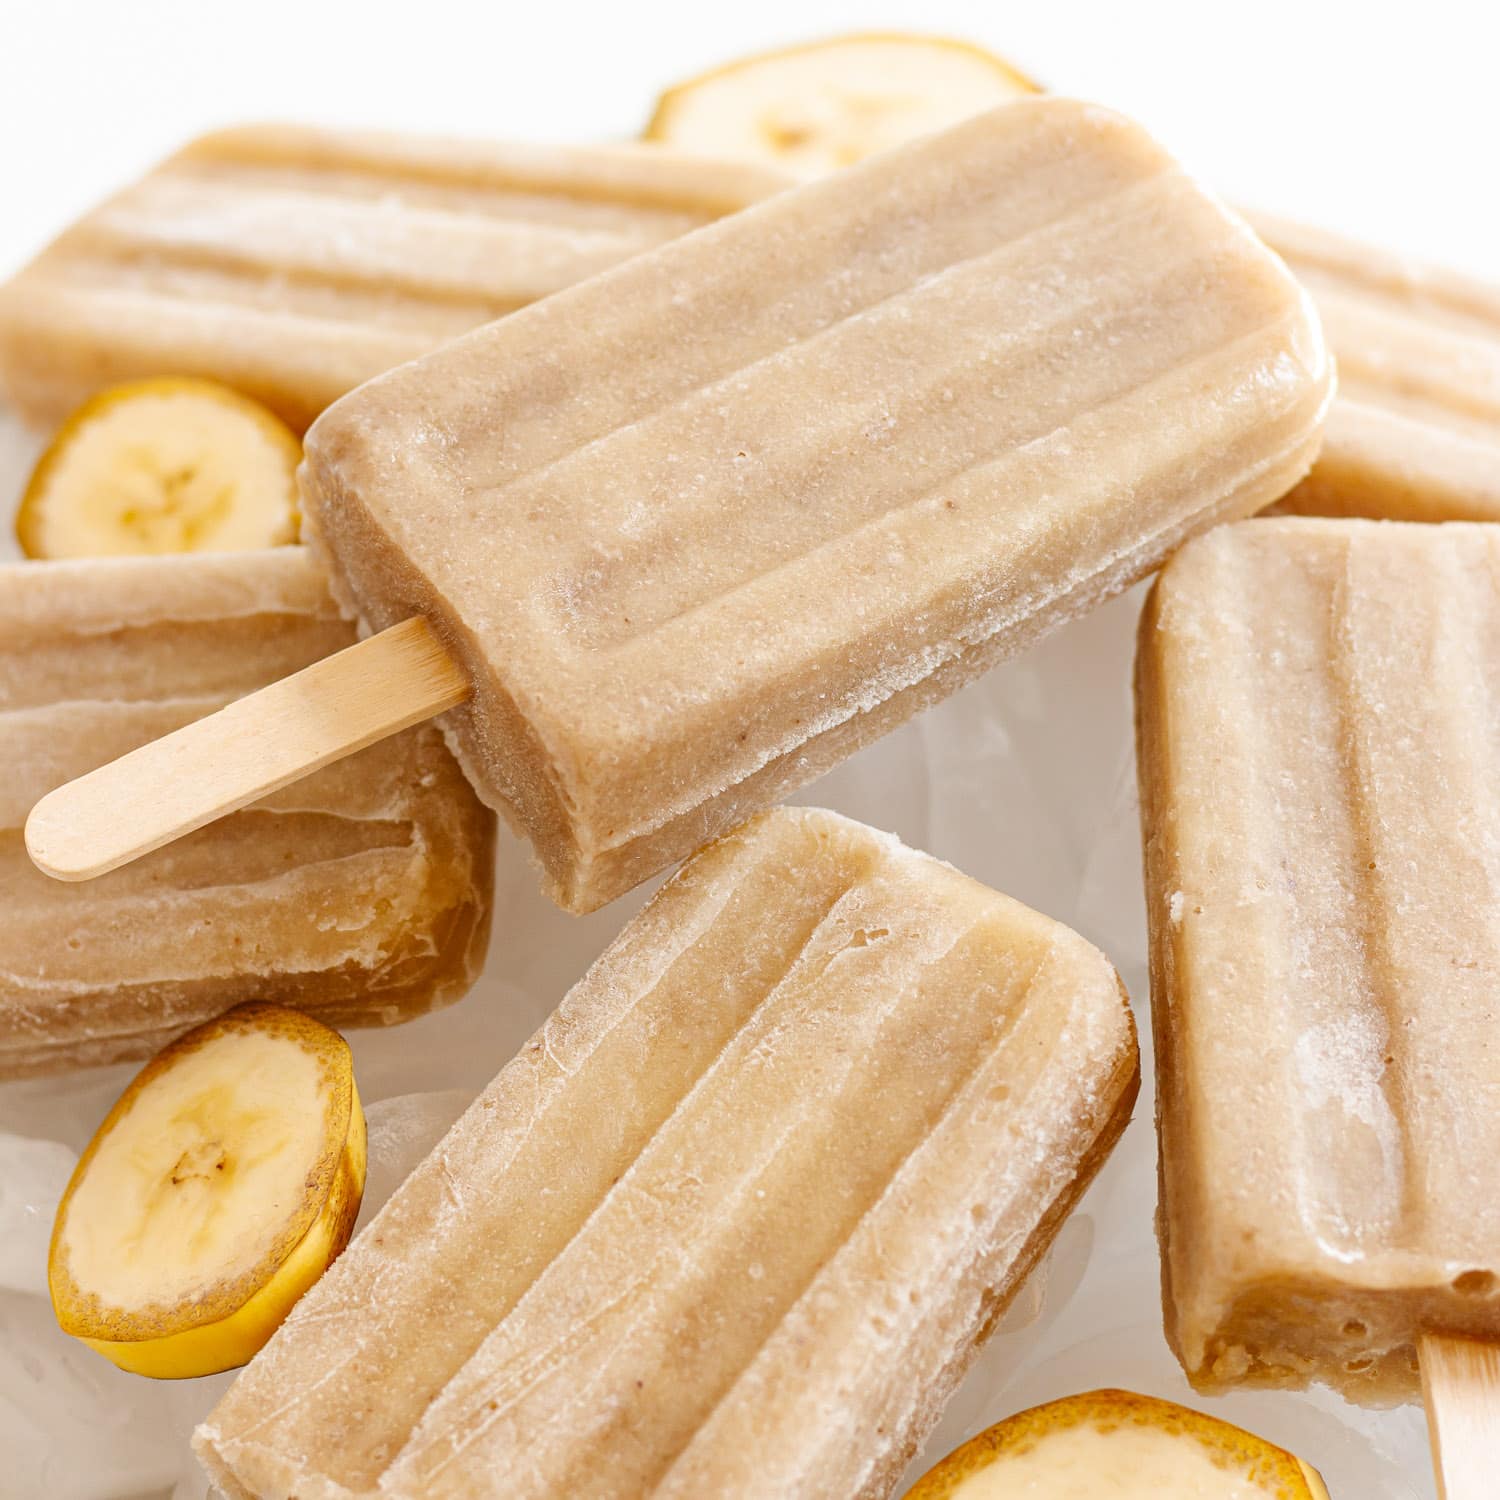 Pile of banana popsicles sitting on ice.